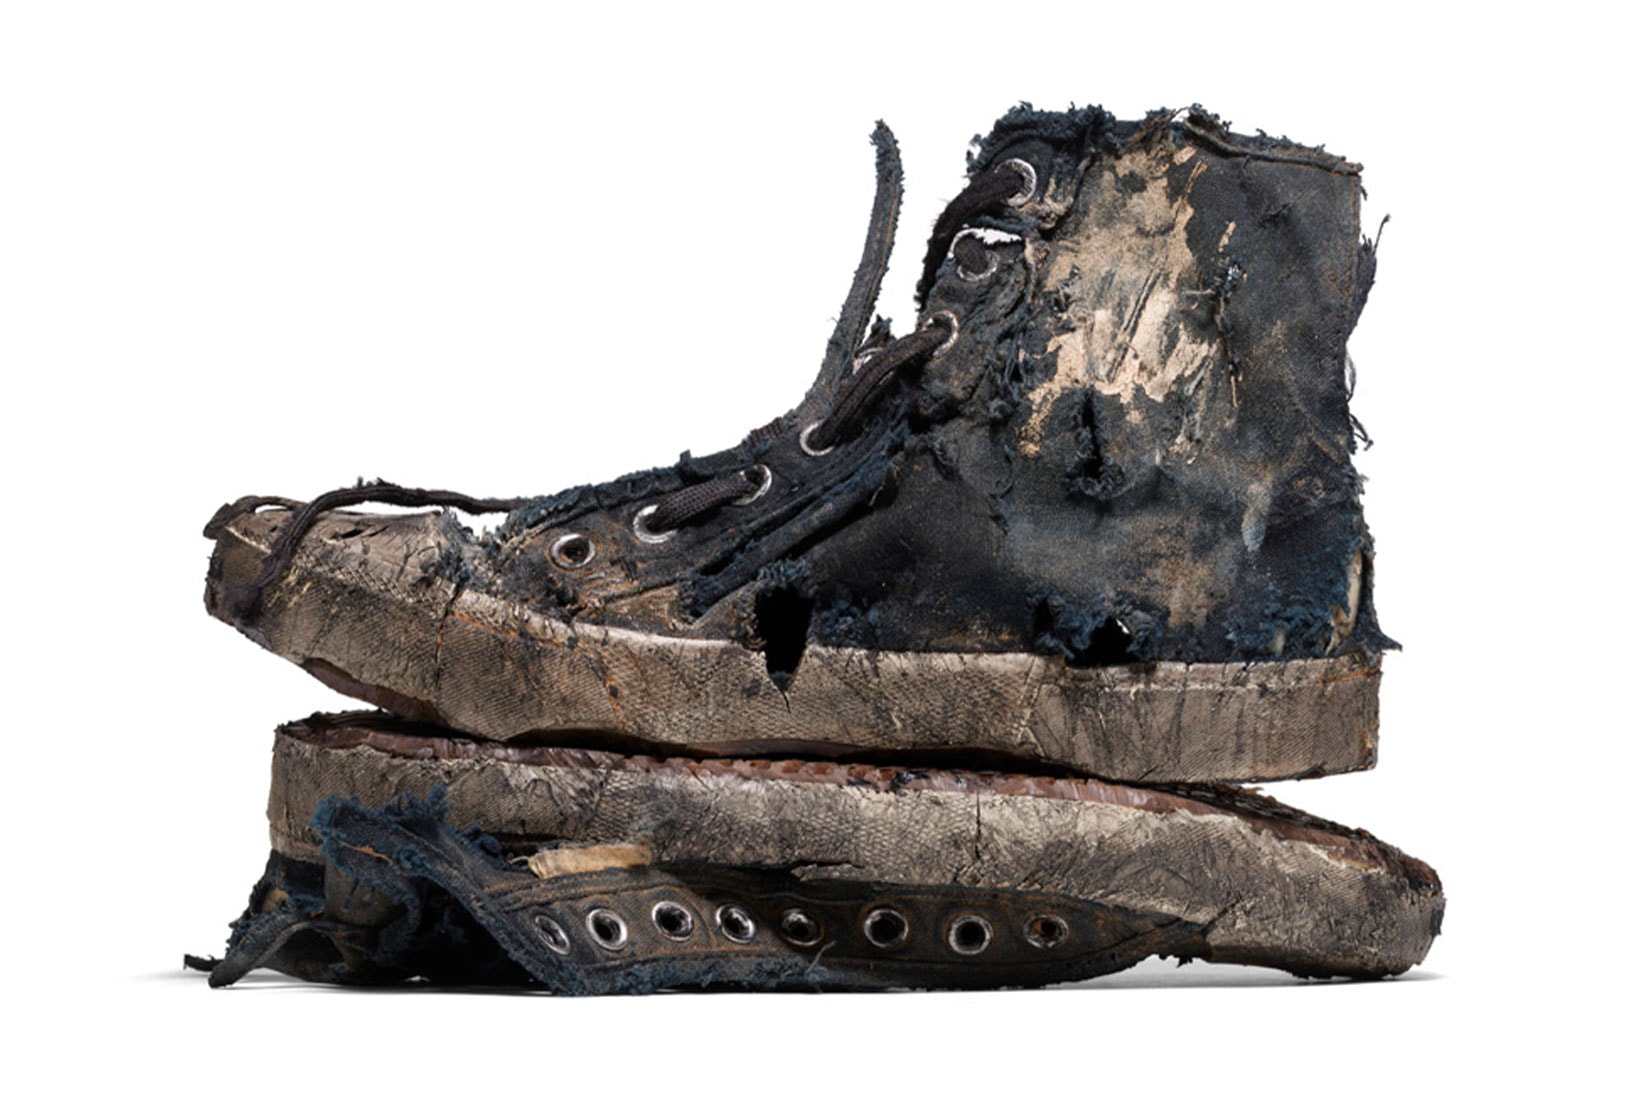 Balenciaga Drops Extremely Worn Sneakers for $625